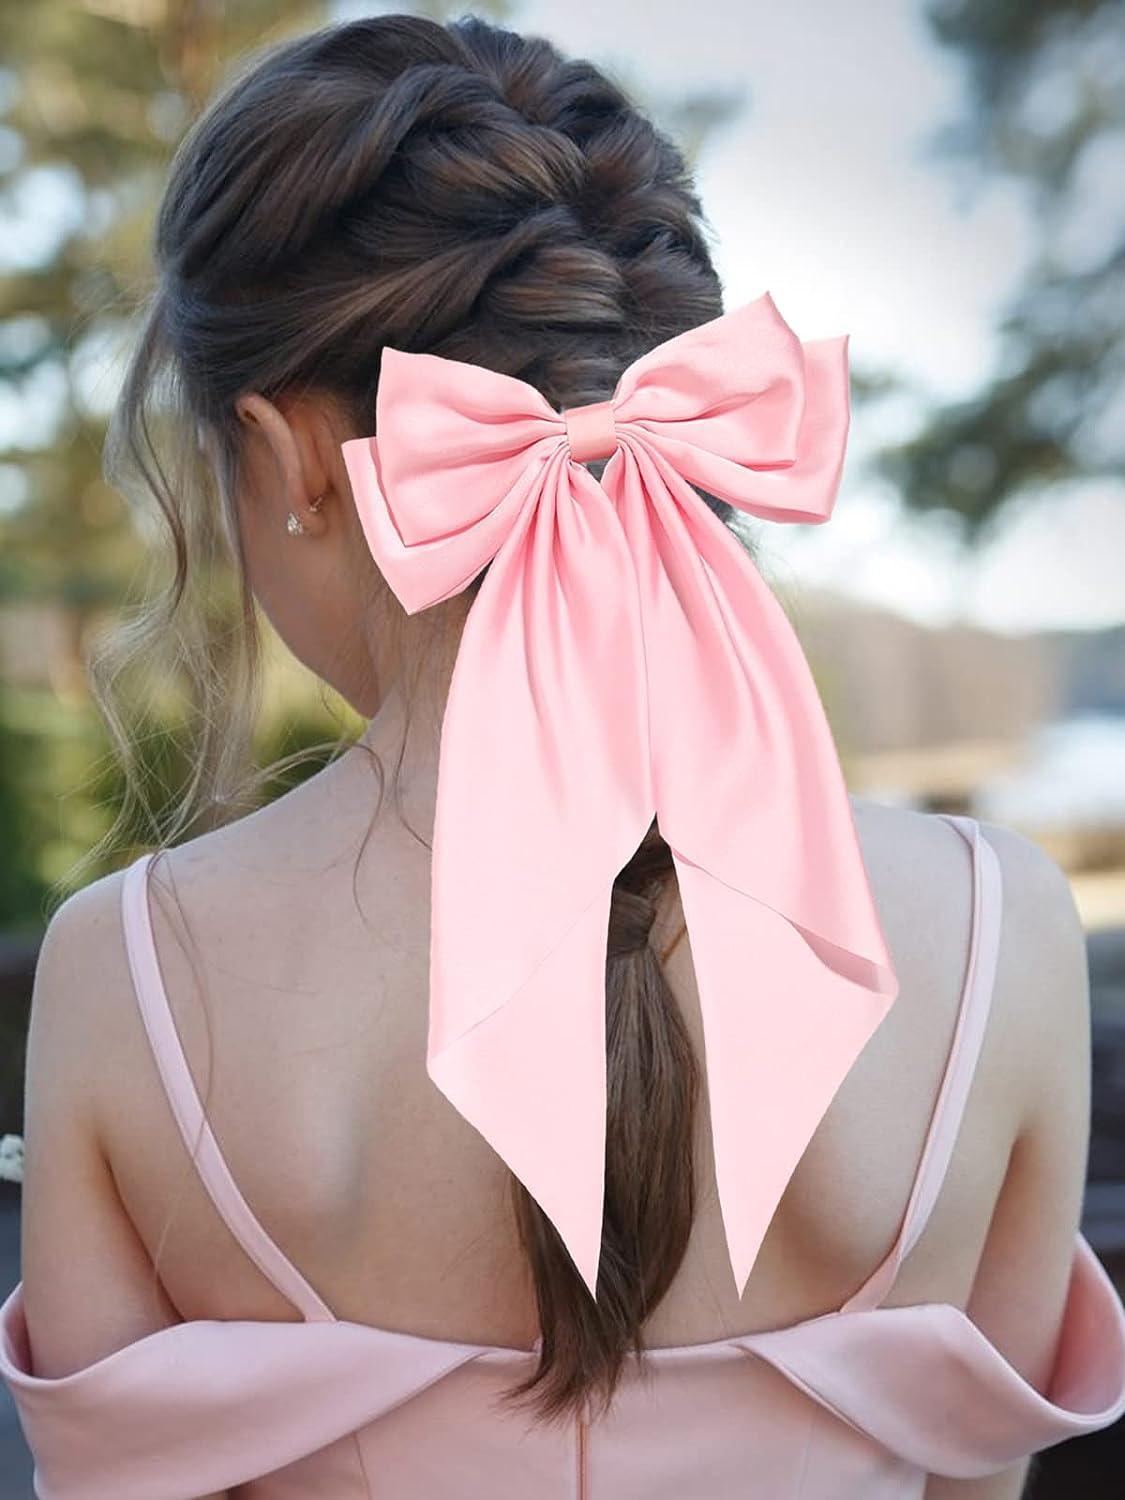 Women Giant Bow,stain Hair Bow, Hot Pink Hair Bow, Stain Bow, Hair